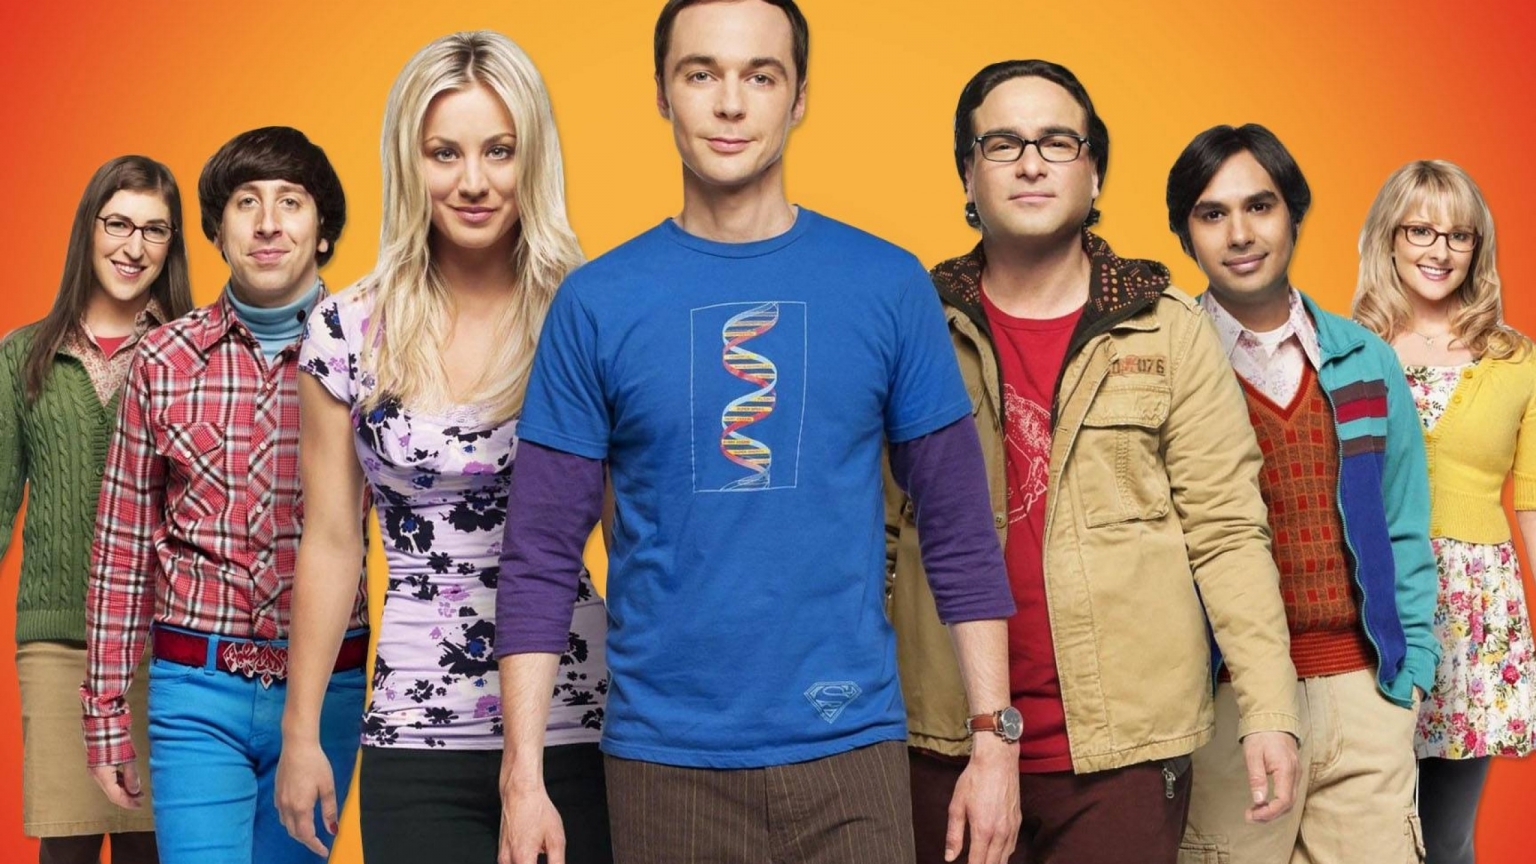 The Big Bang Theory Smiley Cast for 1536 x 864 HDTV resolution